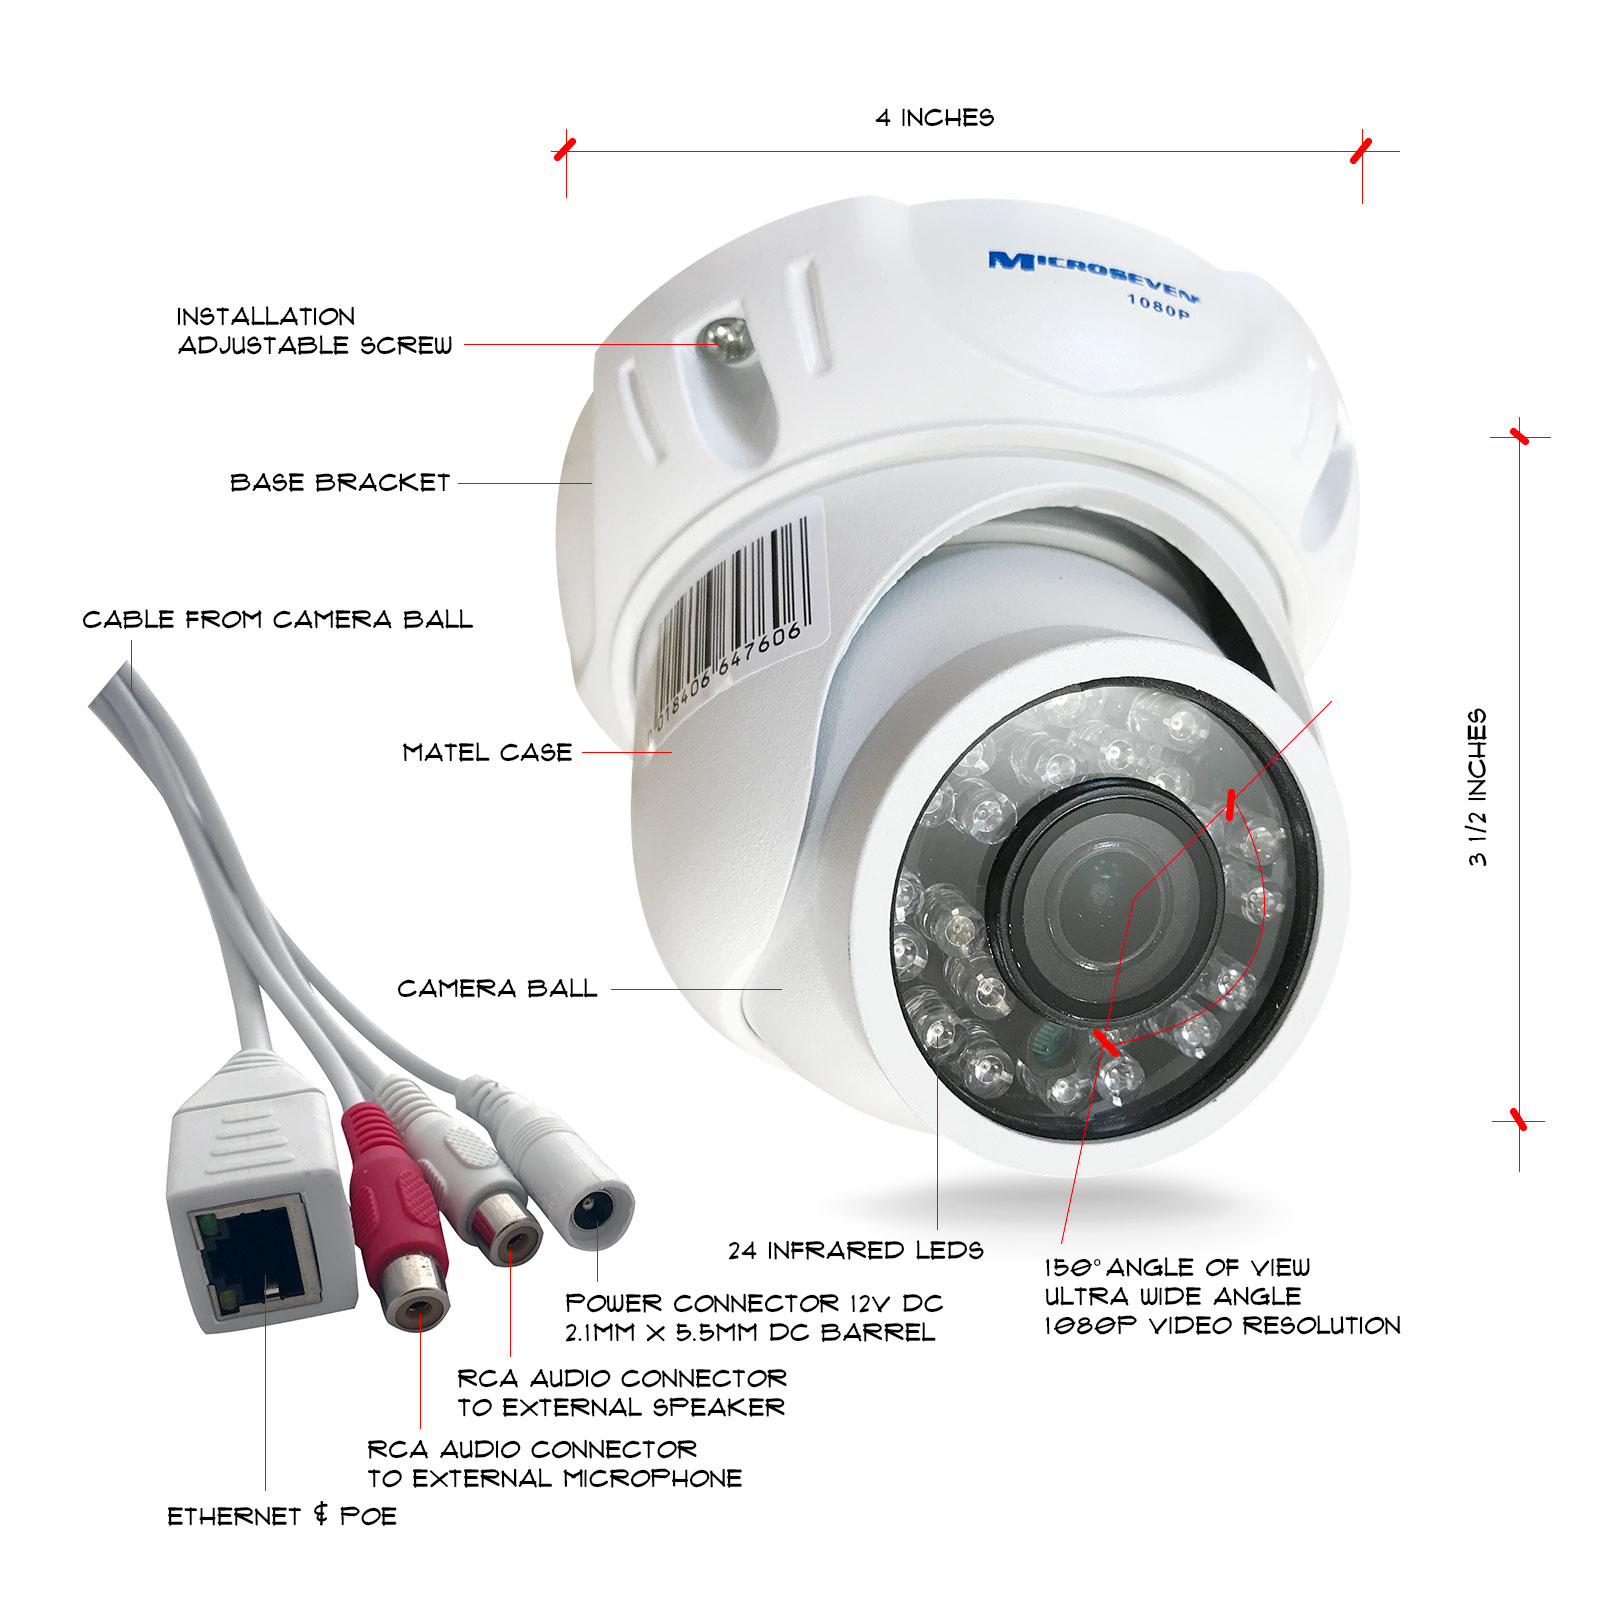 Microseven Open Source WDR ProHD 1080P / 30fps 1/2.5" COMS Ultra-Wide View Angle (150°) 3MP Lens +Two Way Audio P2P Dome IP Camera Build-in POE Day & Night Indoor / Outdoor SD Slot Compatible with Any ONVIF NVR, Web GUI & Apps, VMS (Video Management System), Free M7 Cloud and Free Live Streaming on microseven.tv / Works with Alexa